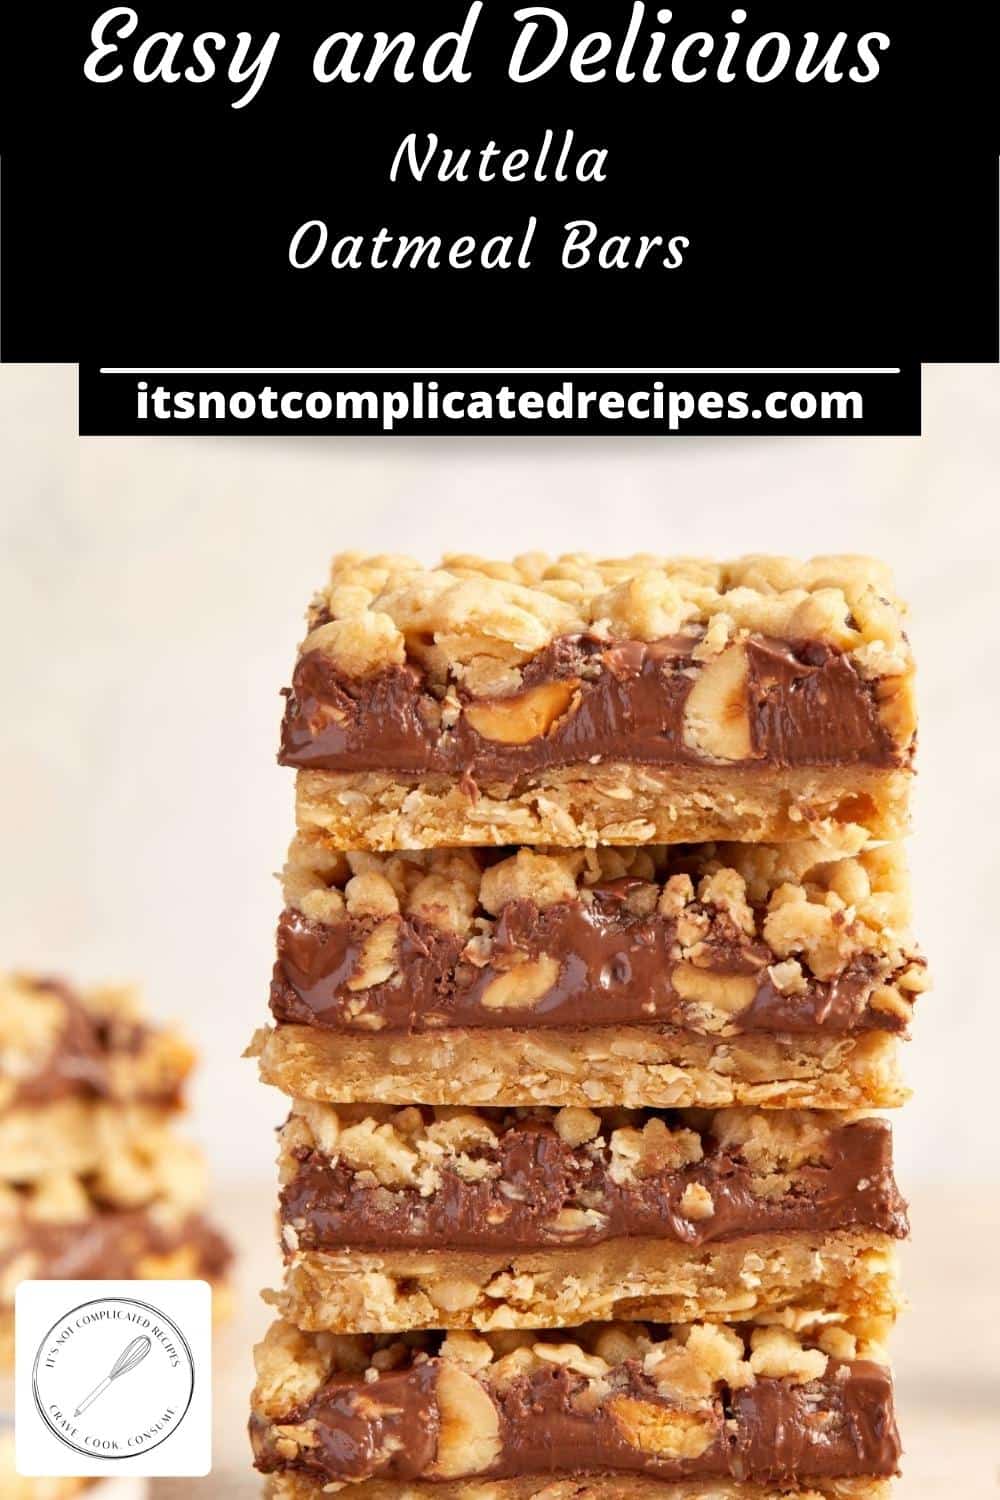 Nutella Oatmeal Bars - It's Not Complicated Recipes